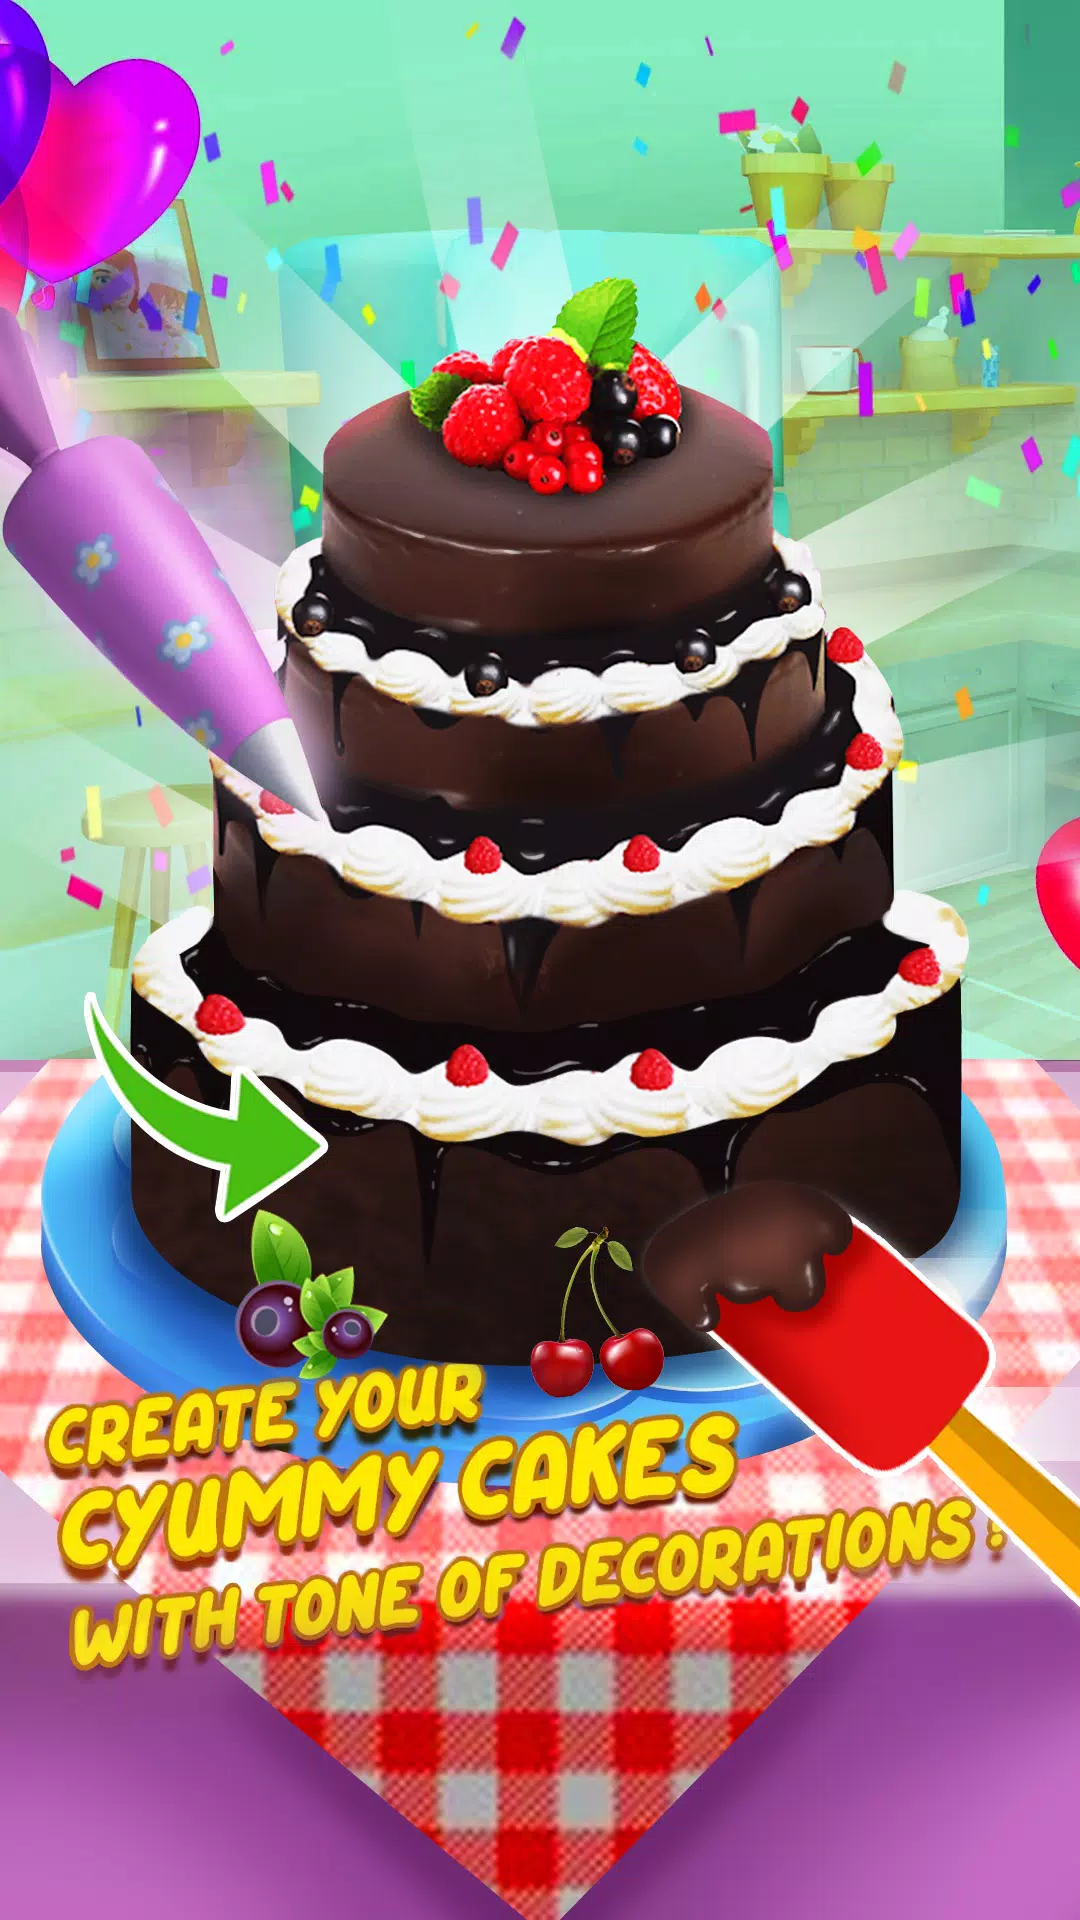 Create a Cake - Cooking Games